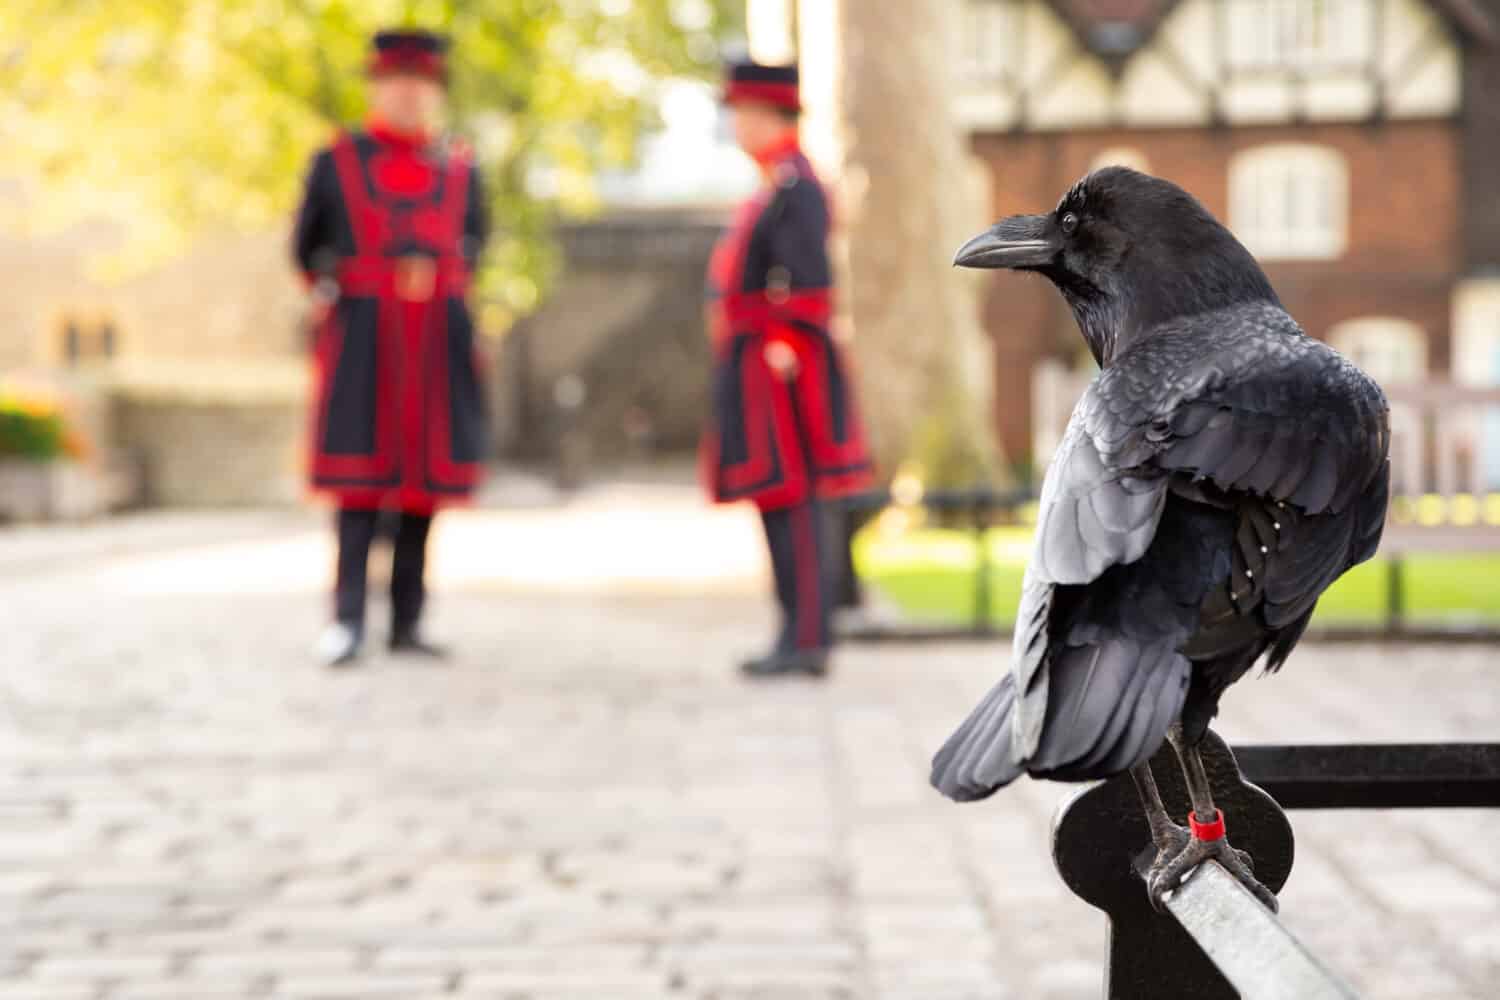 Raven perched on a railing at the Tower of London, with two Yeomen Warders in the blurry background, and space for text on the left